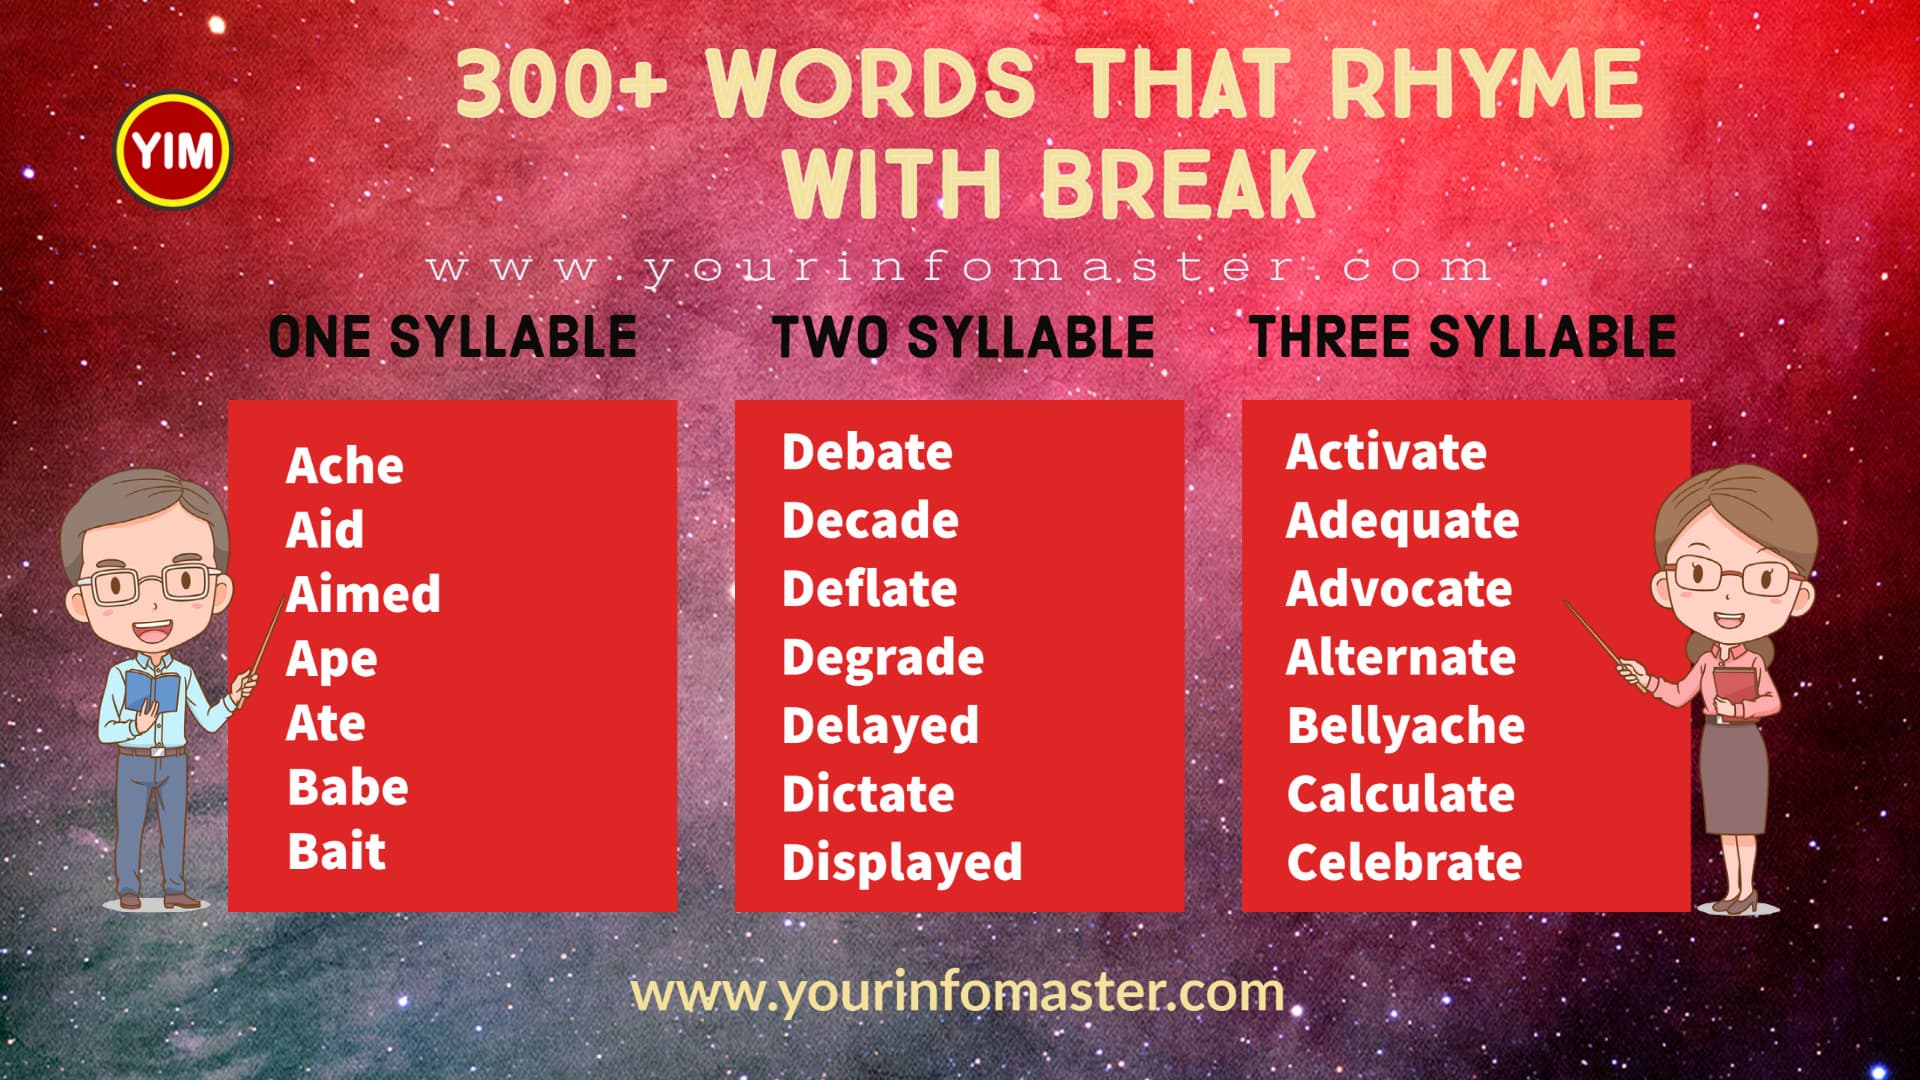 100 rhyming words, 1000 rhyming words, 200+ Interesting Words, 200+ Useful Words, 300 rhyming words list, 50 rhyming words list, 500 rhyming words, all words that rhyme with Break, Another word for Break, are rhyming words, Break rhyme, Break rhyme examples, Break Rhyming words, how to teach rhyming words, Interesting Words that Rhyme in English, Printable Infographics, Printable Worksheets, rhymes English words, rhymes with Break infographics, rhyming pairs, Rhyming Words, rhyming words for Break, Rhyming Words for Kids, Rhyming Words List, Things that rhyme with Break, what are rhyming words, what rhymes with Break, words rhyming with Break, Words that Rhyme, Words That Rhyme with Break